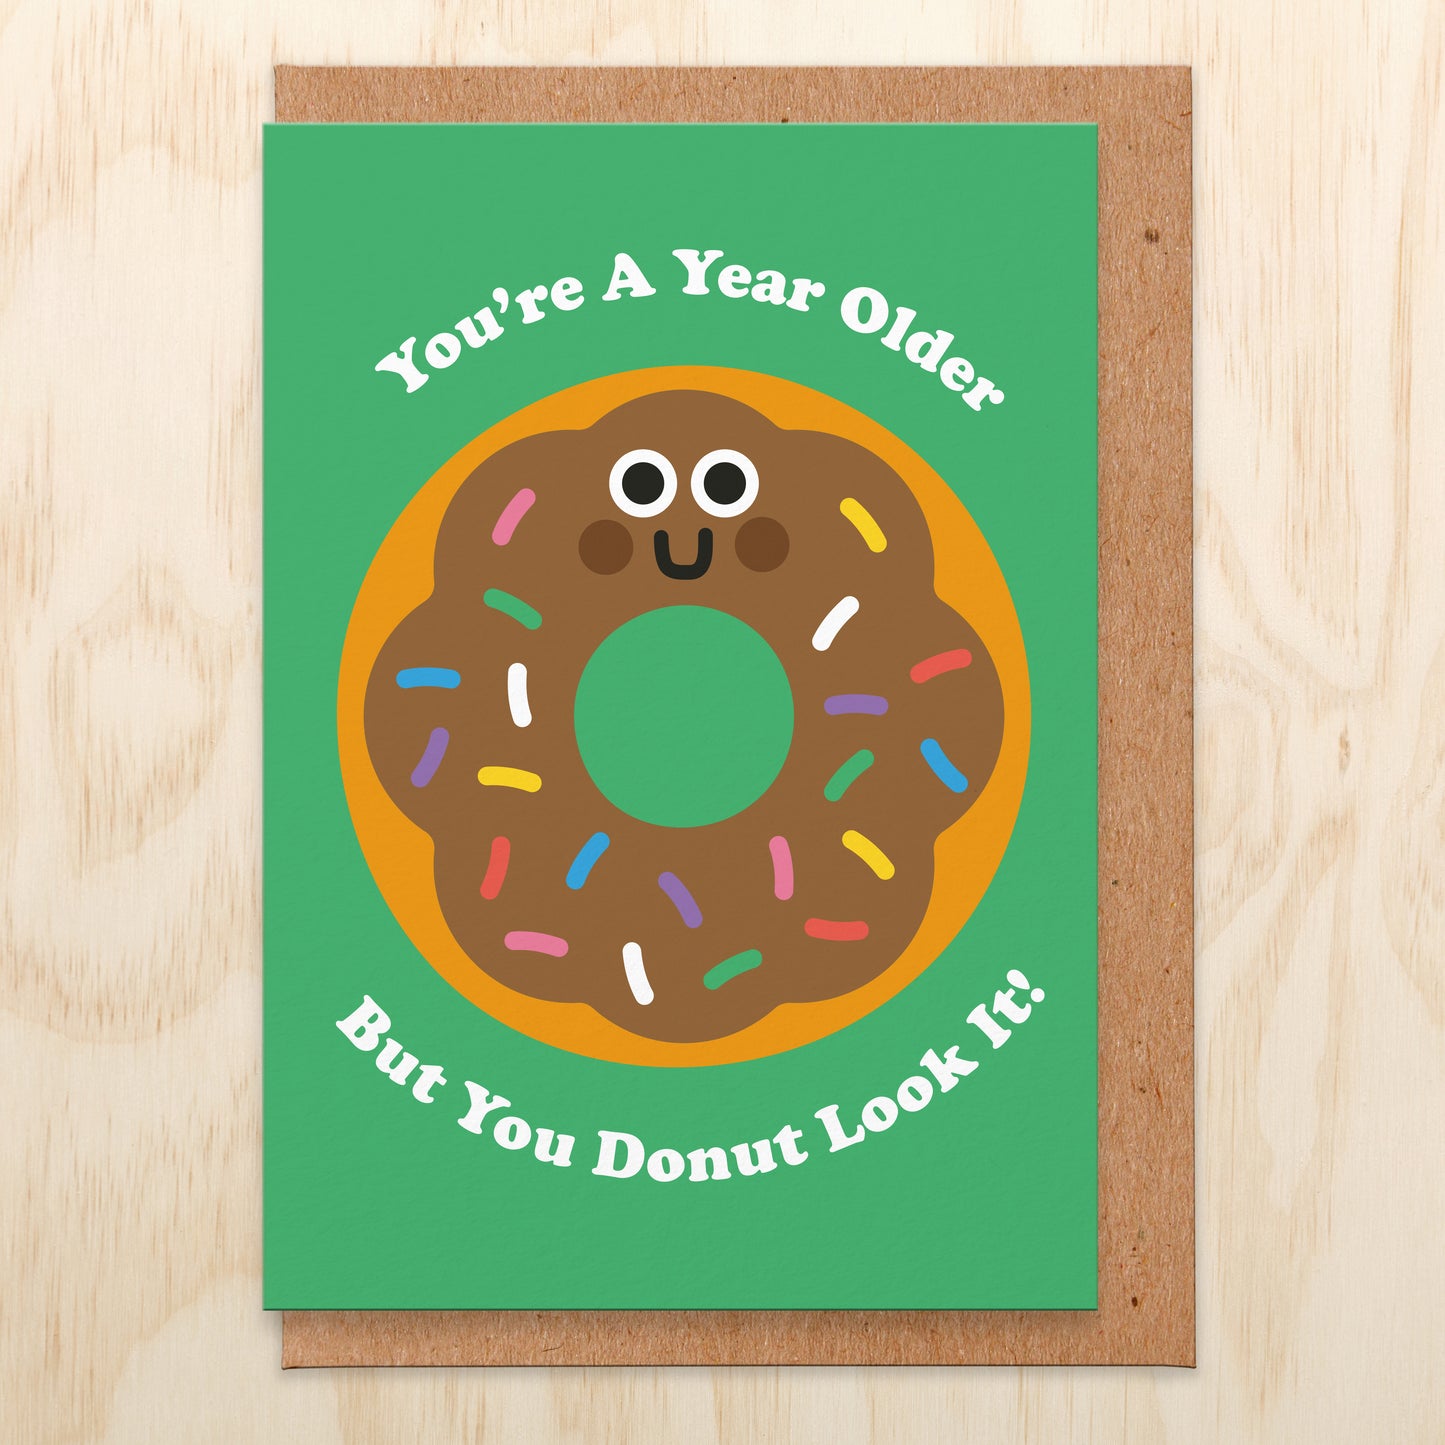 Birthday card that has a green background and an illustration of a chocolate donut with sprinkles on. The wording is you're a year older but you donut look it!